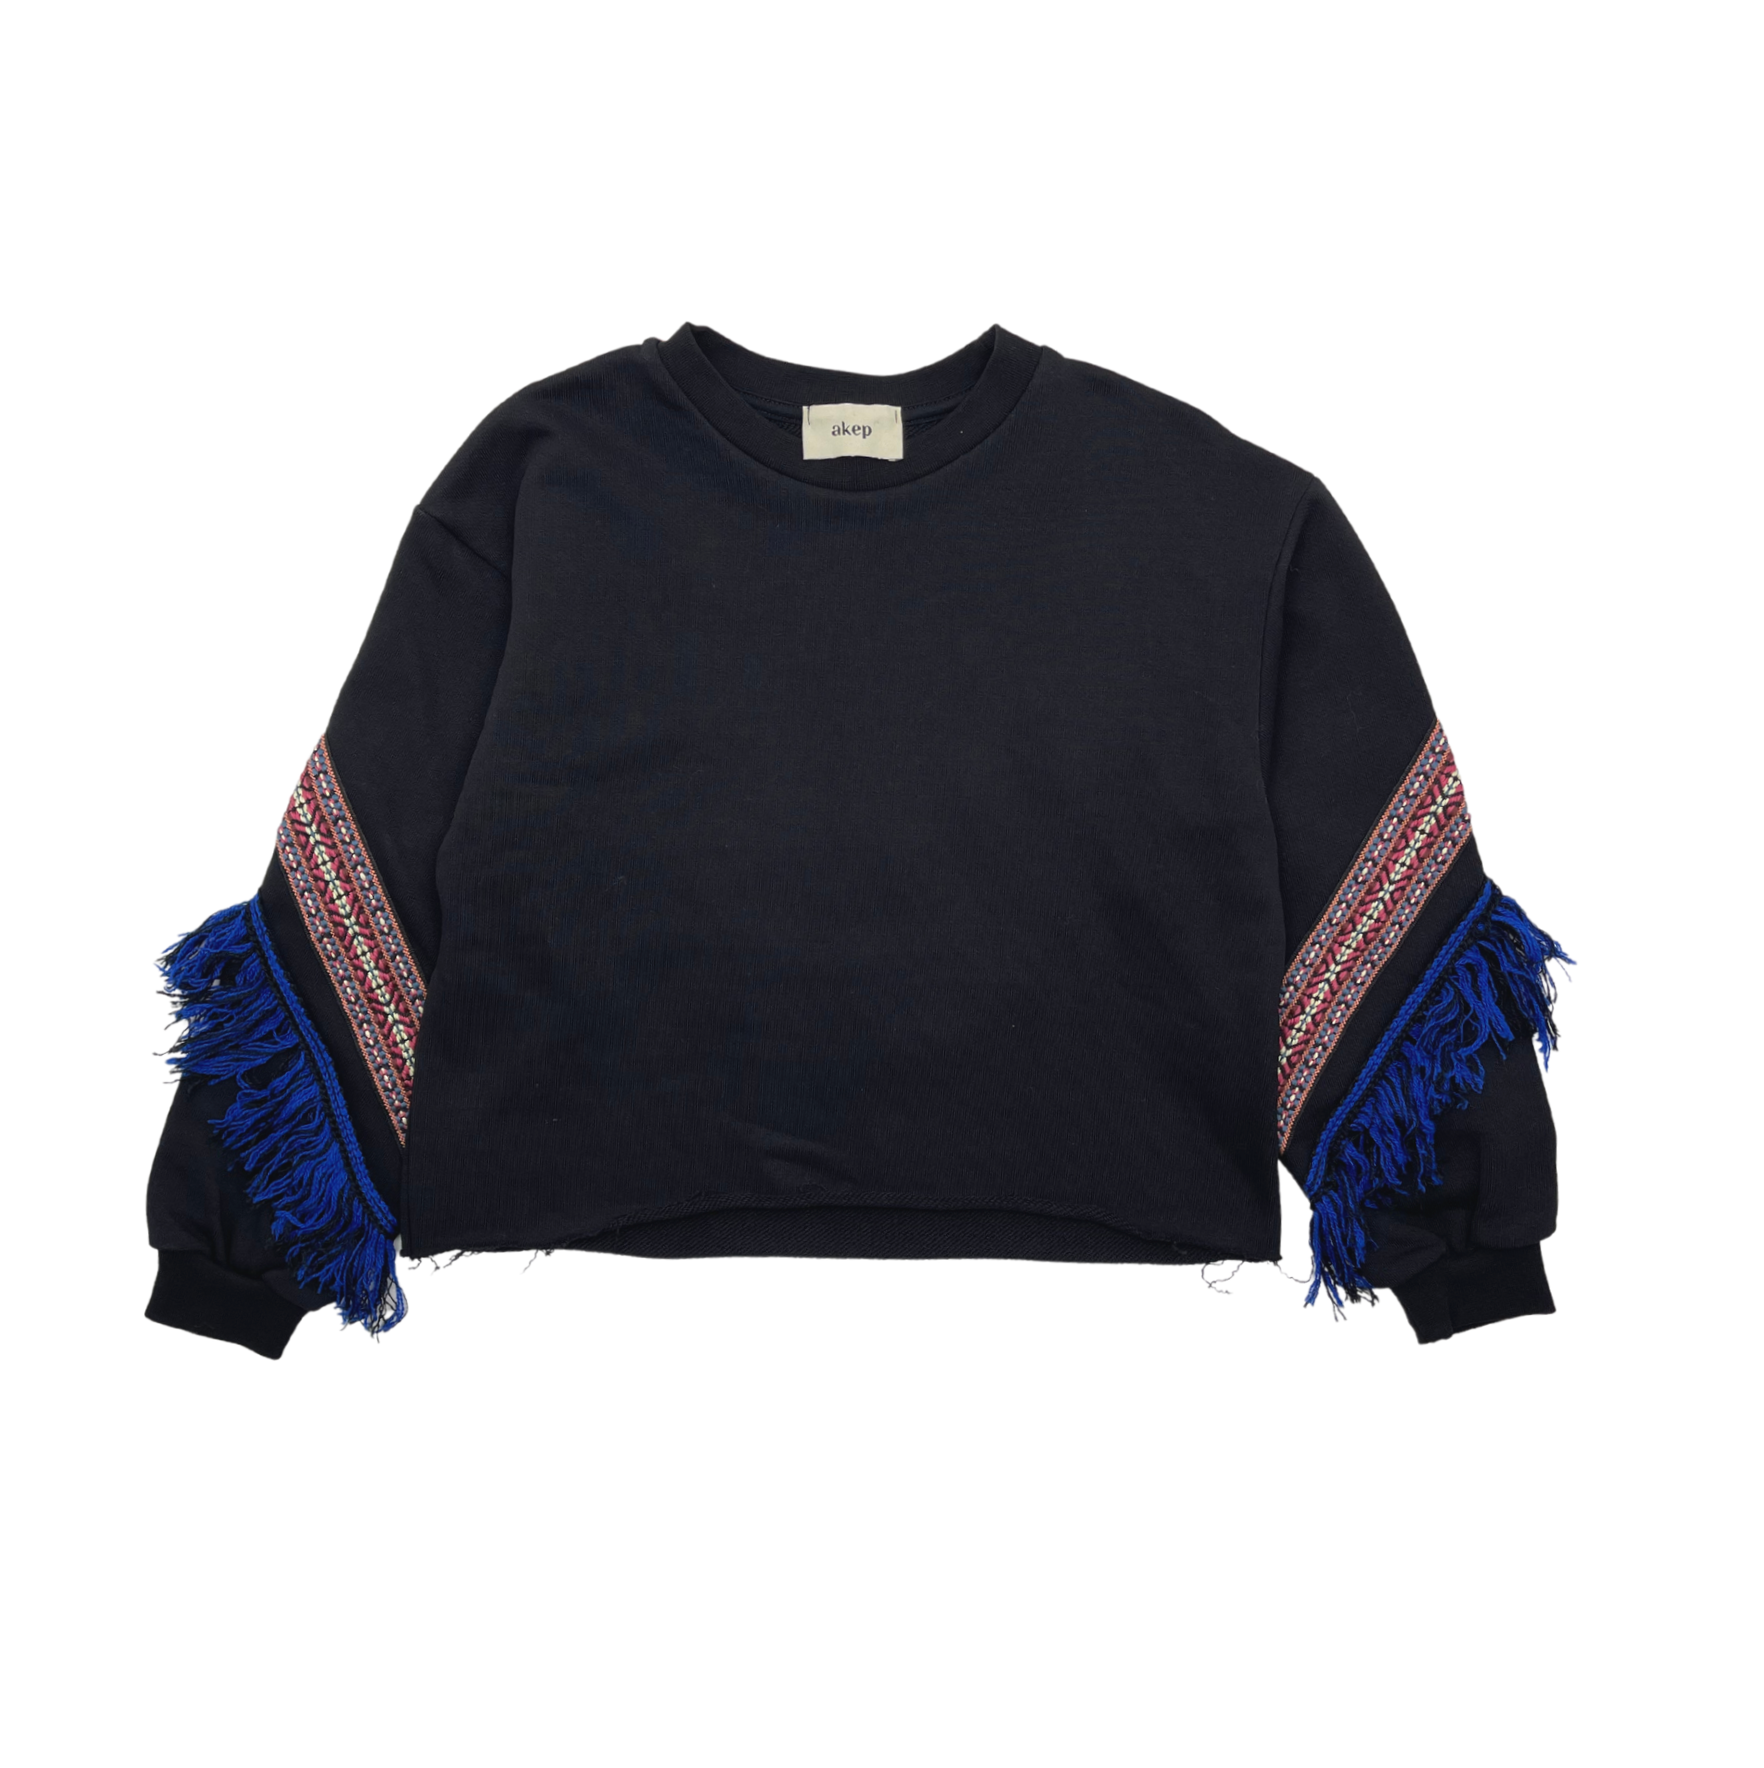 AKEP - Black sweatshirt with embroidery &amp; colored fringing - 10 years old